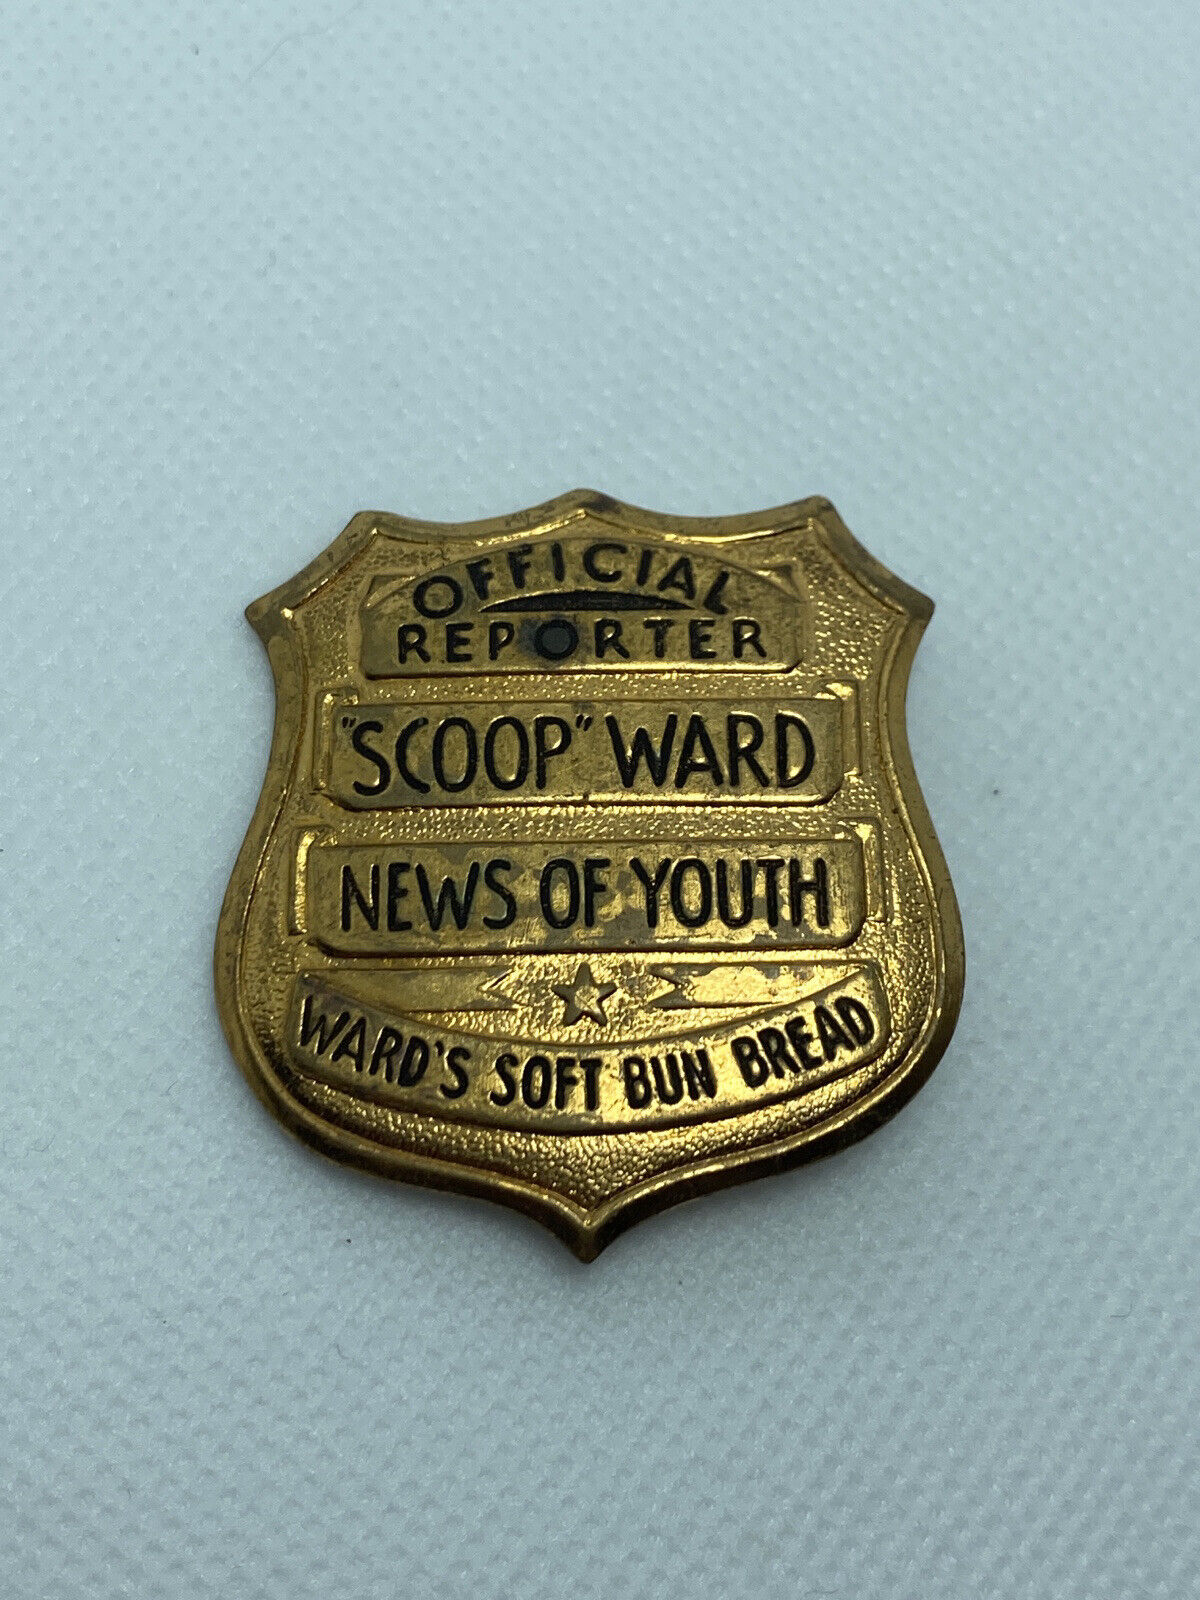 Vintage 1930s Wards Bread Scoop Ward News Of Youth Official Reporter Kids Badge